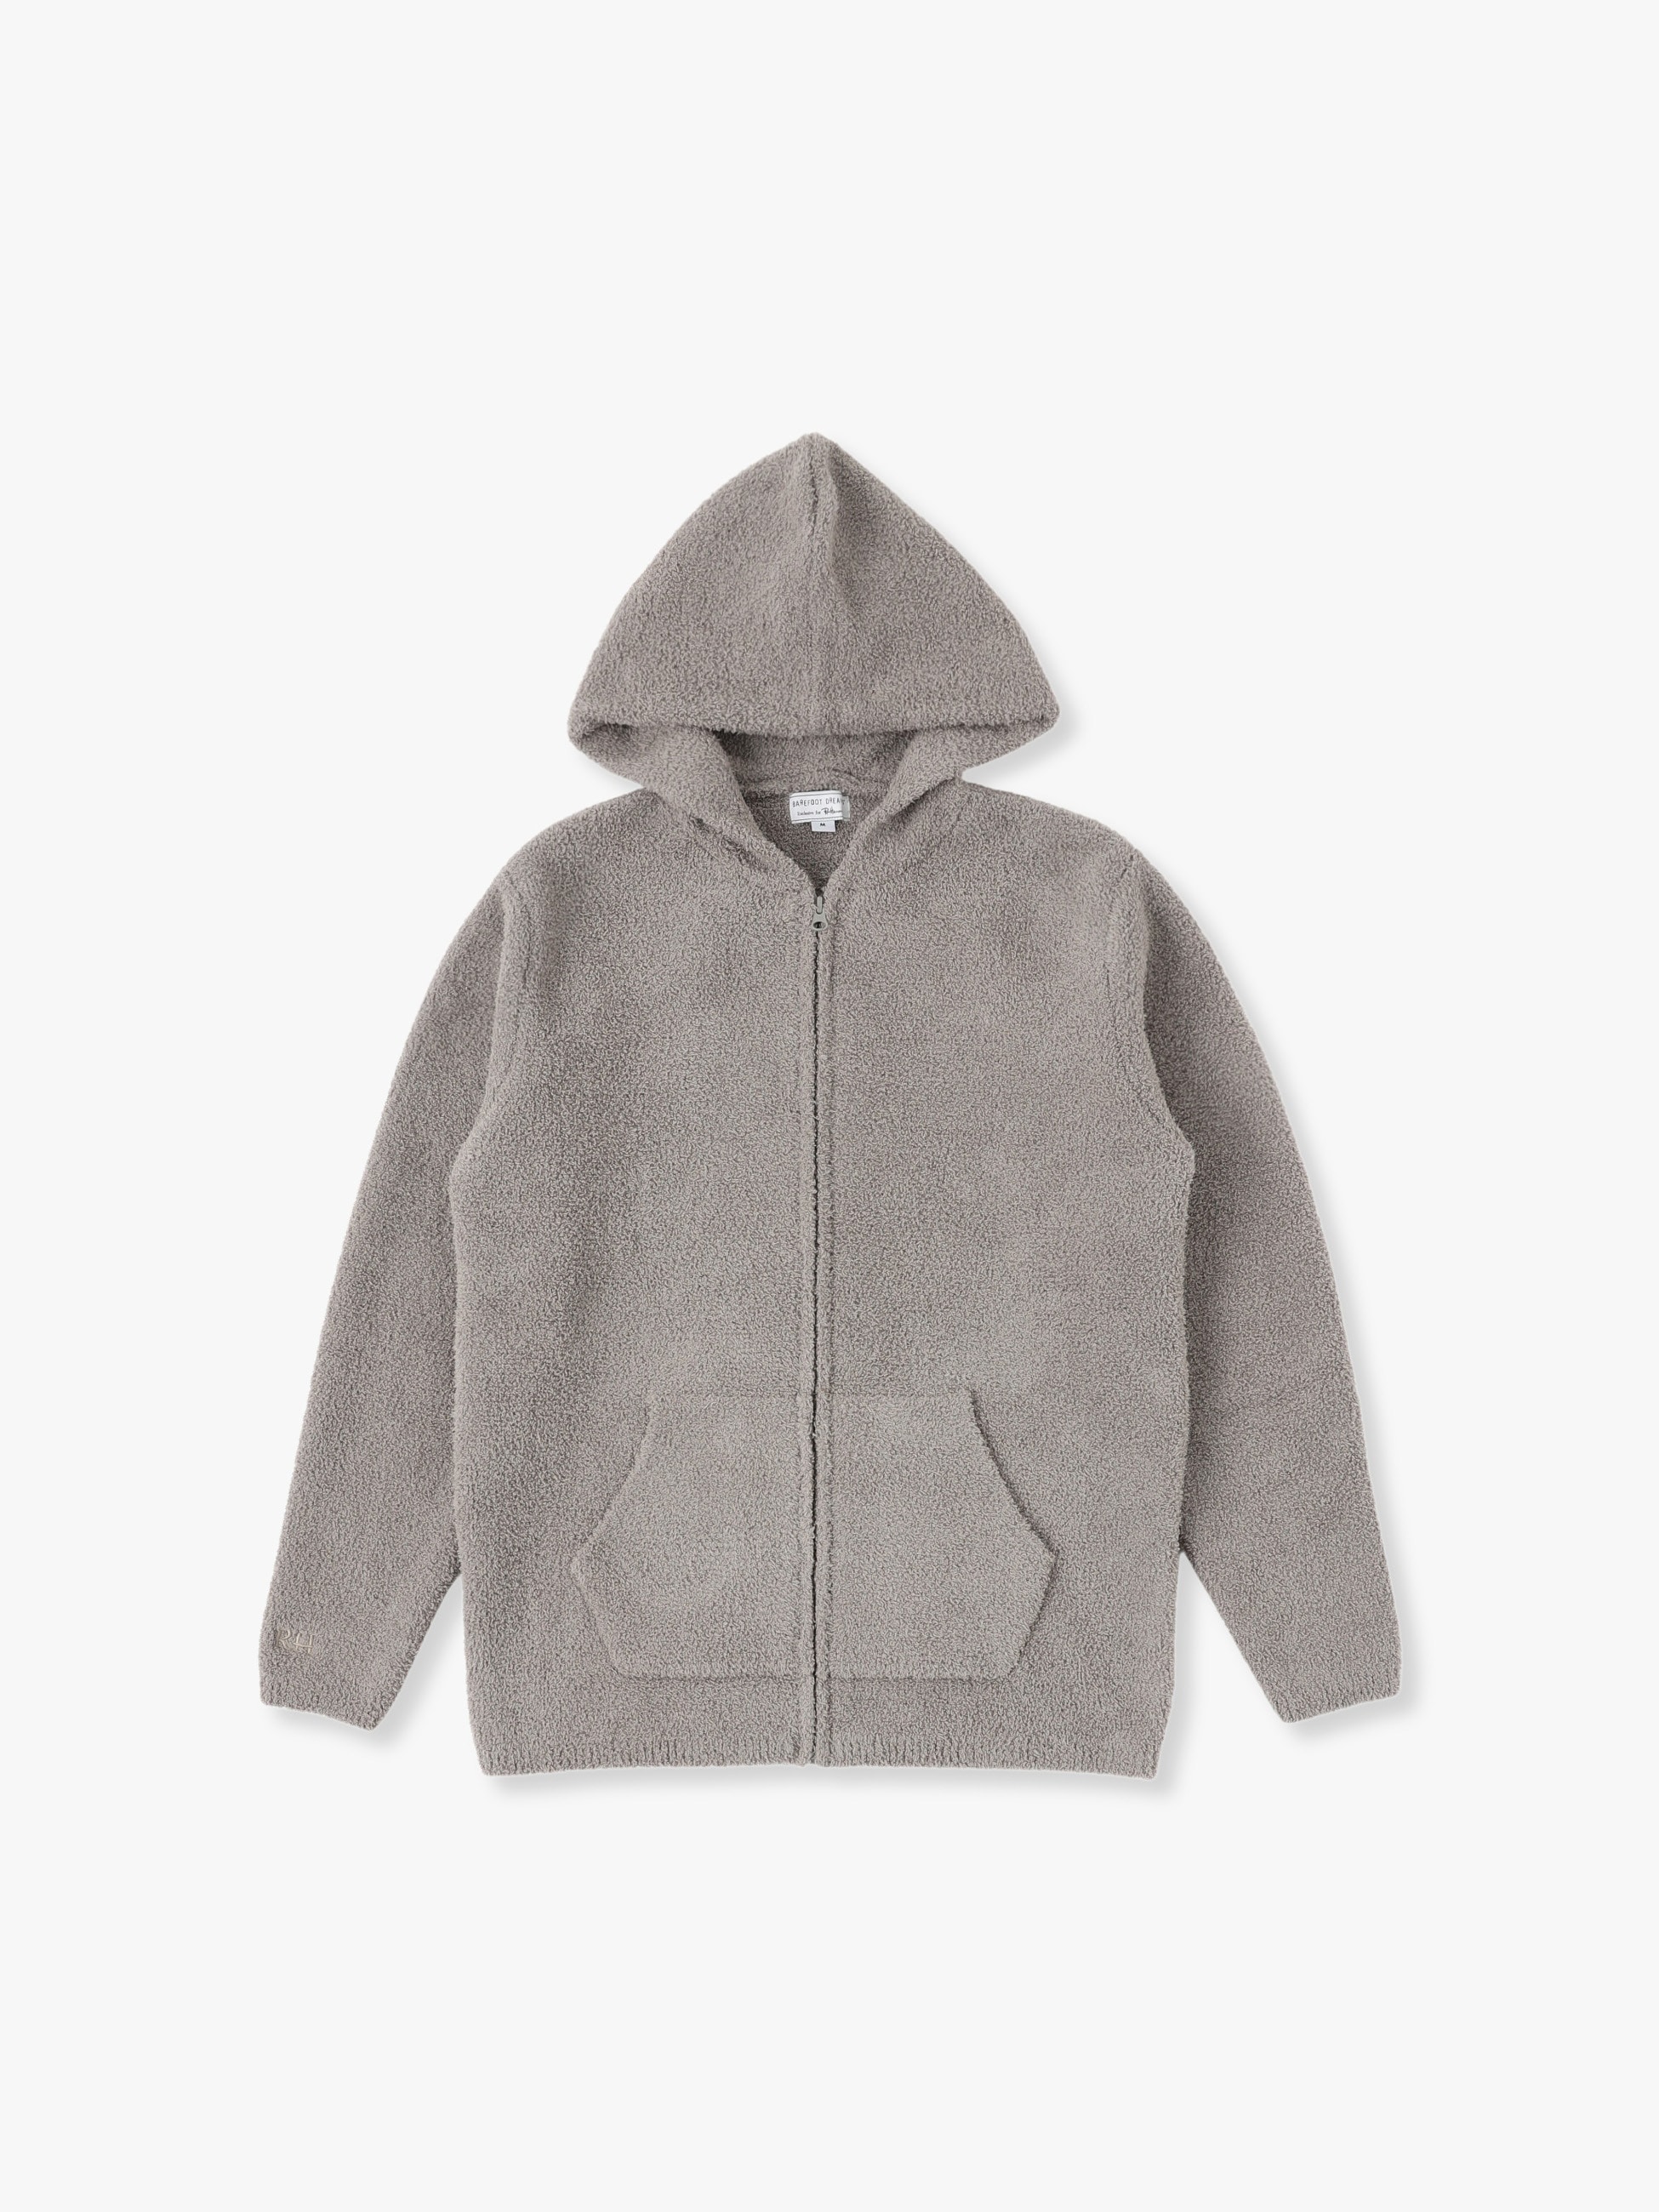 Double Jacquard Solid Hoodie｜BAREFOOT DREAMS for Ron Herman 